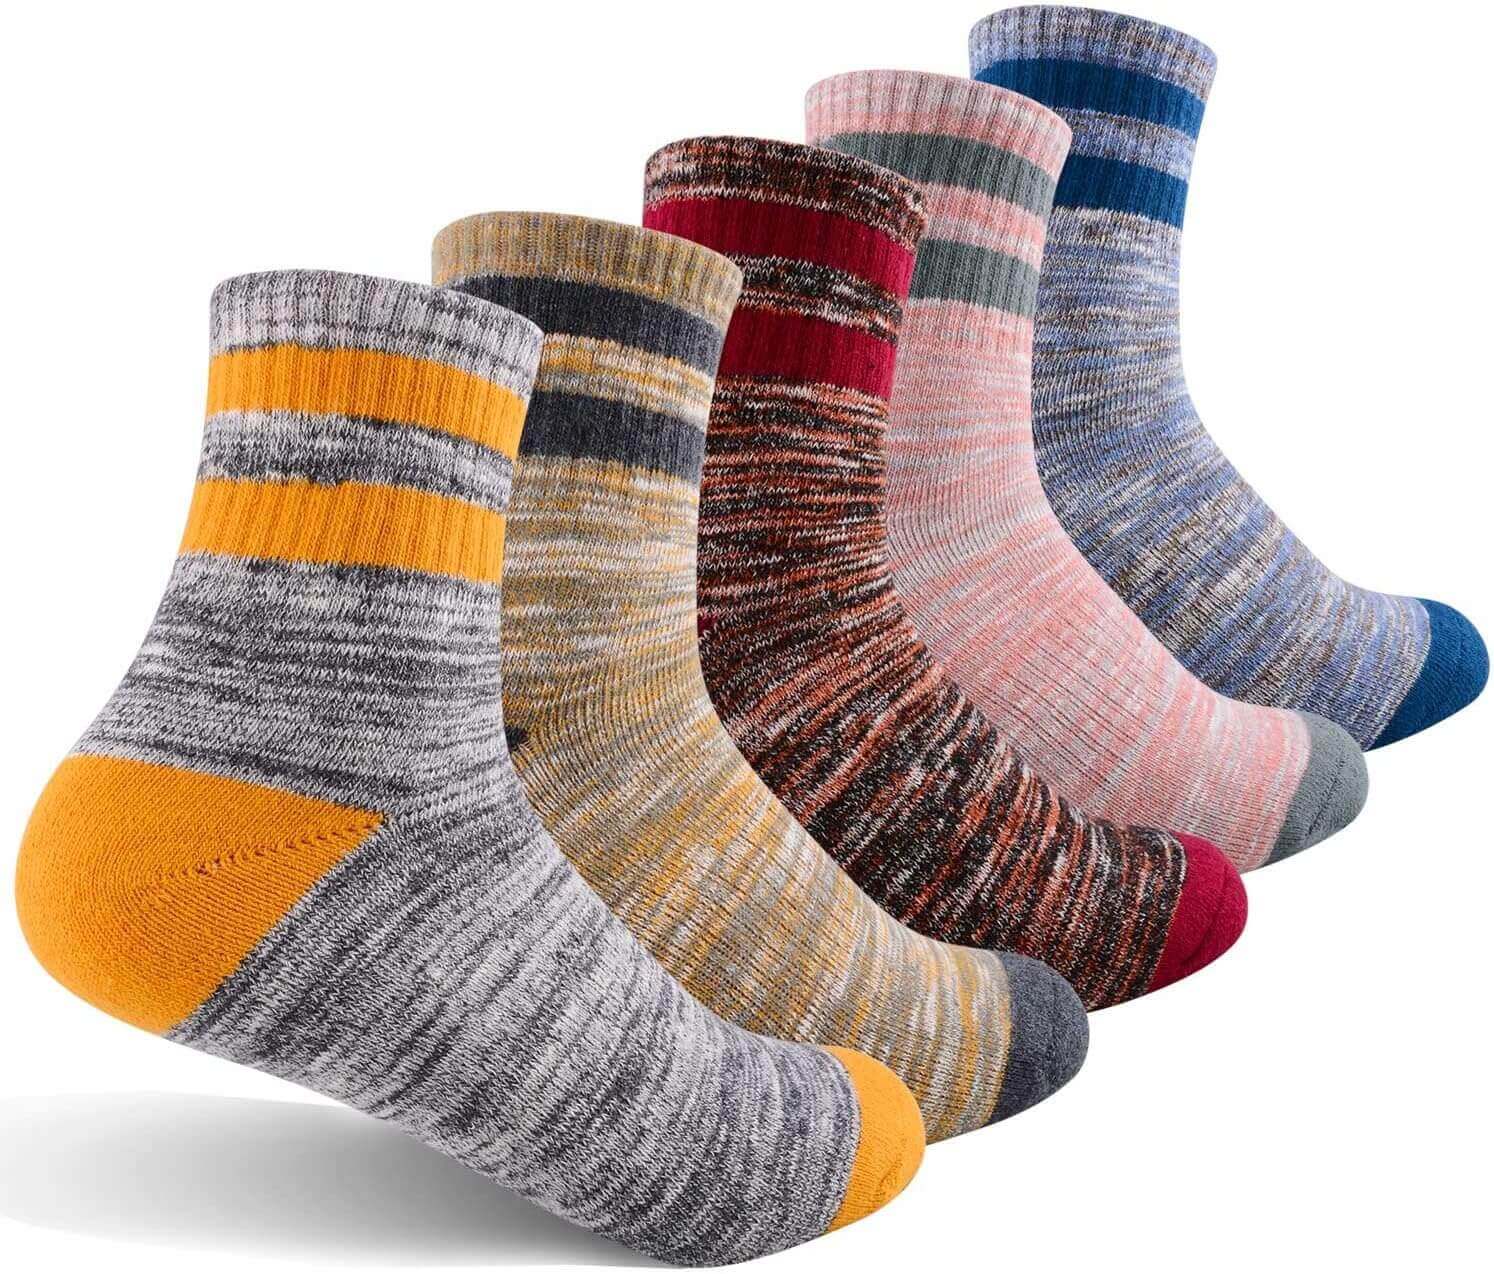 Shop The Latest >Women's Hiking Walking Socks, Multi-pack Outdoor Recreation > *Only $32.39*> From The Top Brand > *FEIDEERl* > Shop Now and Get Free Shipping On Orders Over $45.00 >*Shop Earth Foot*